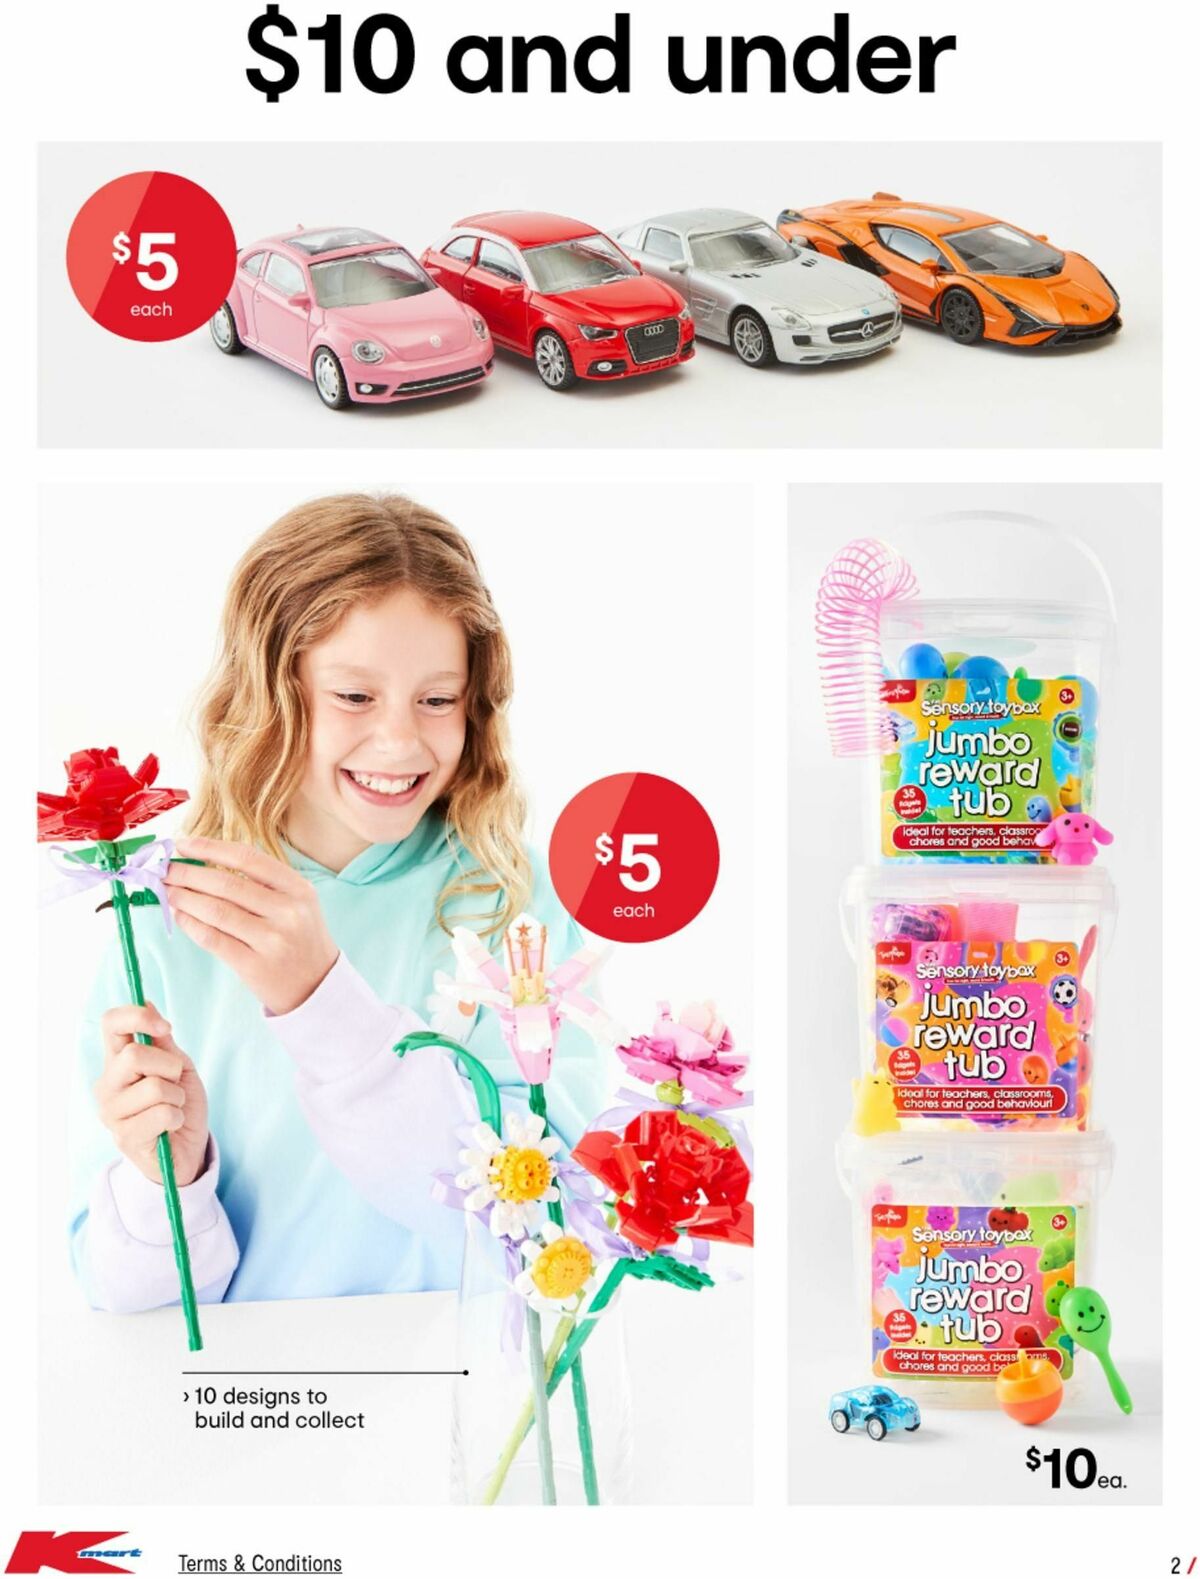 Kmart Catalogues from 28 March